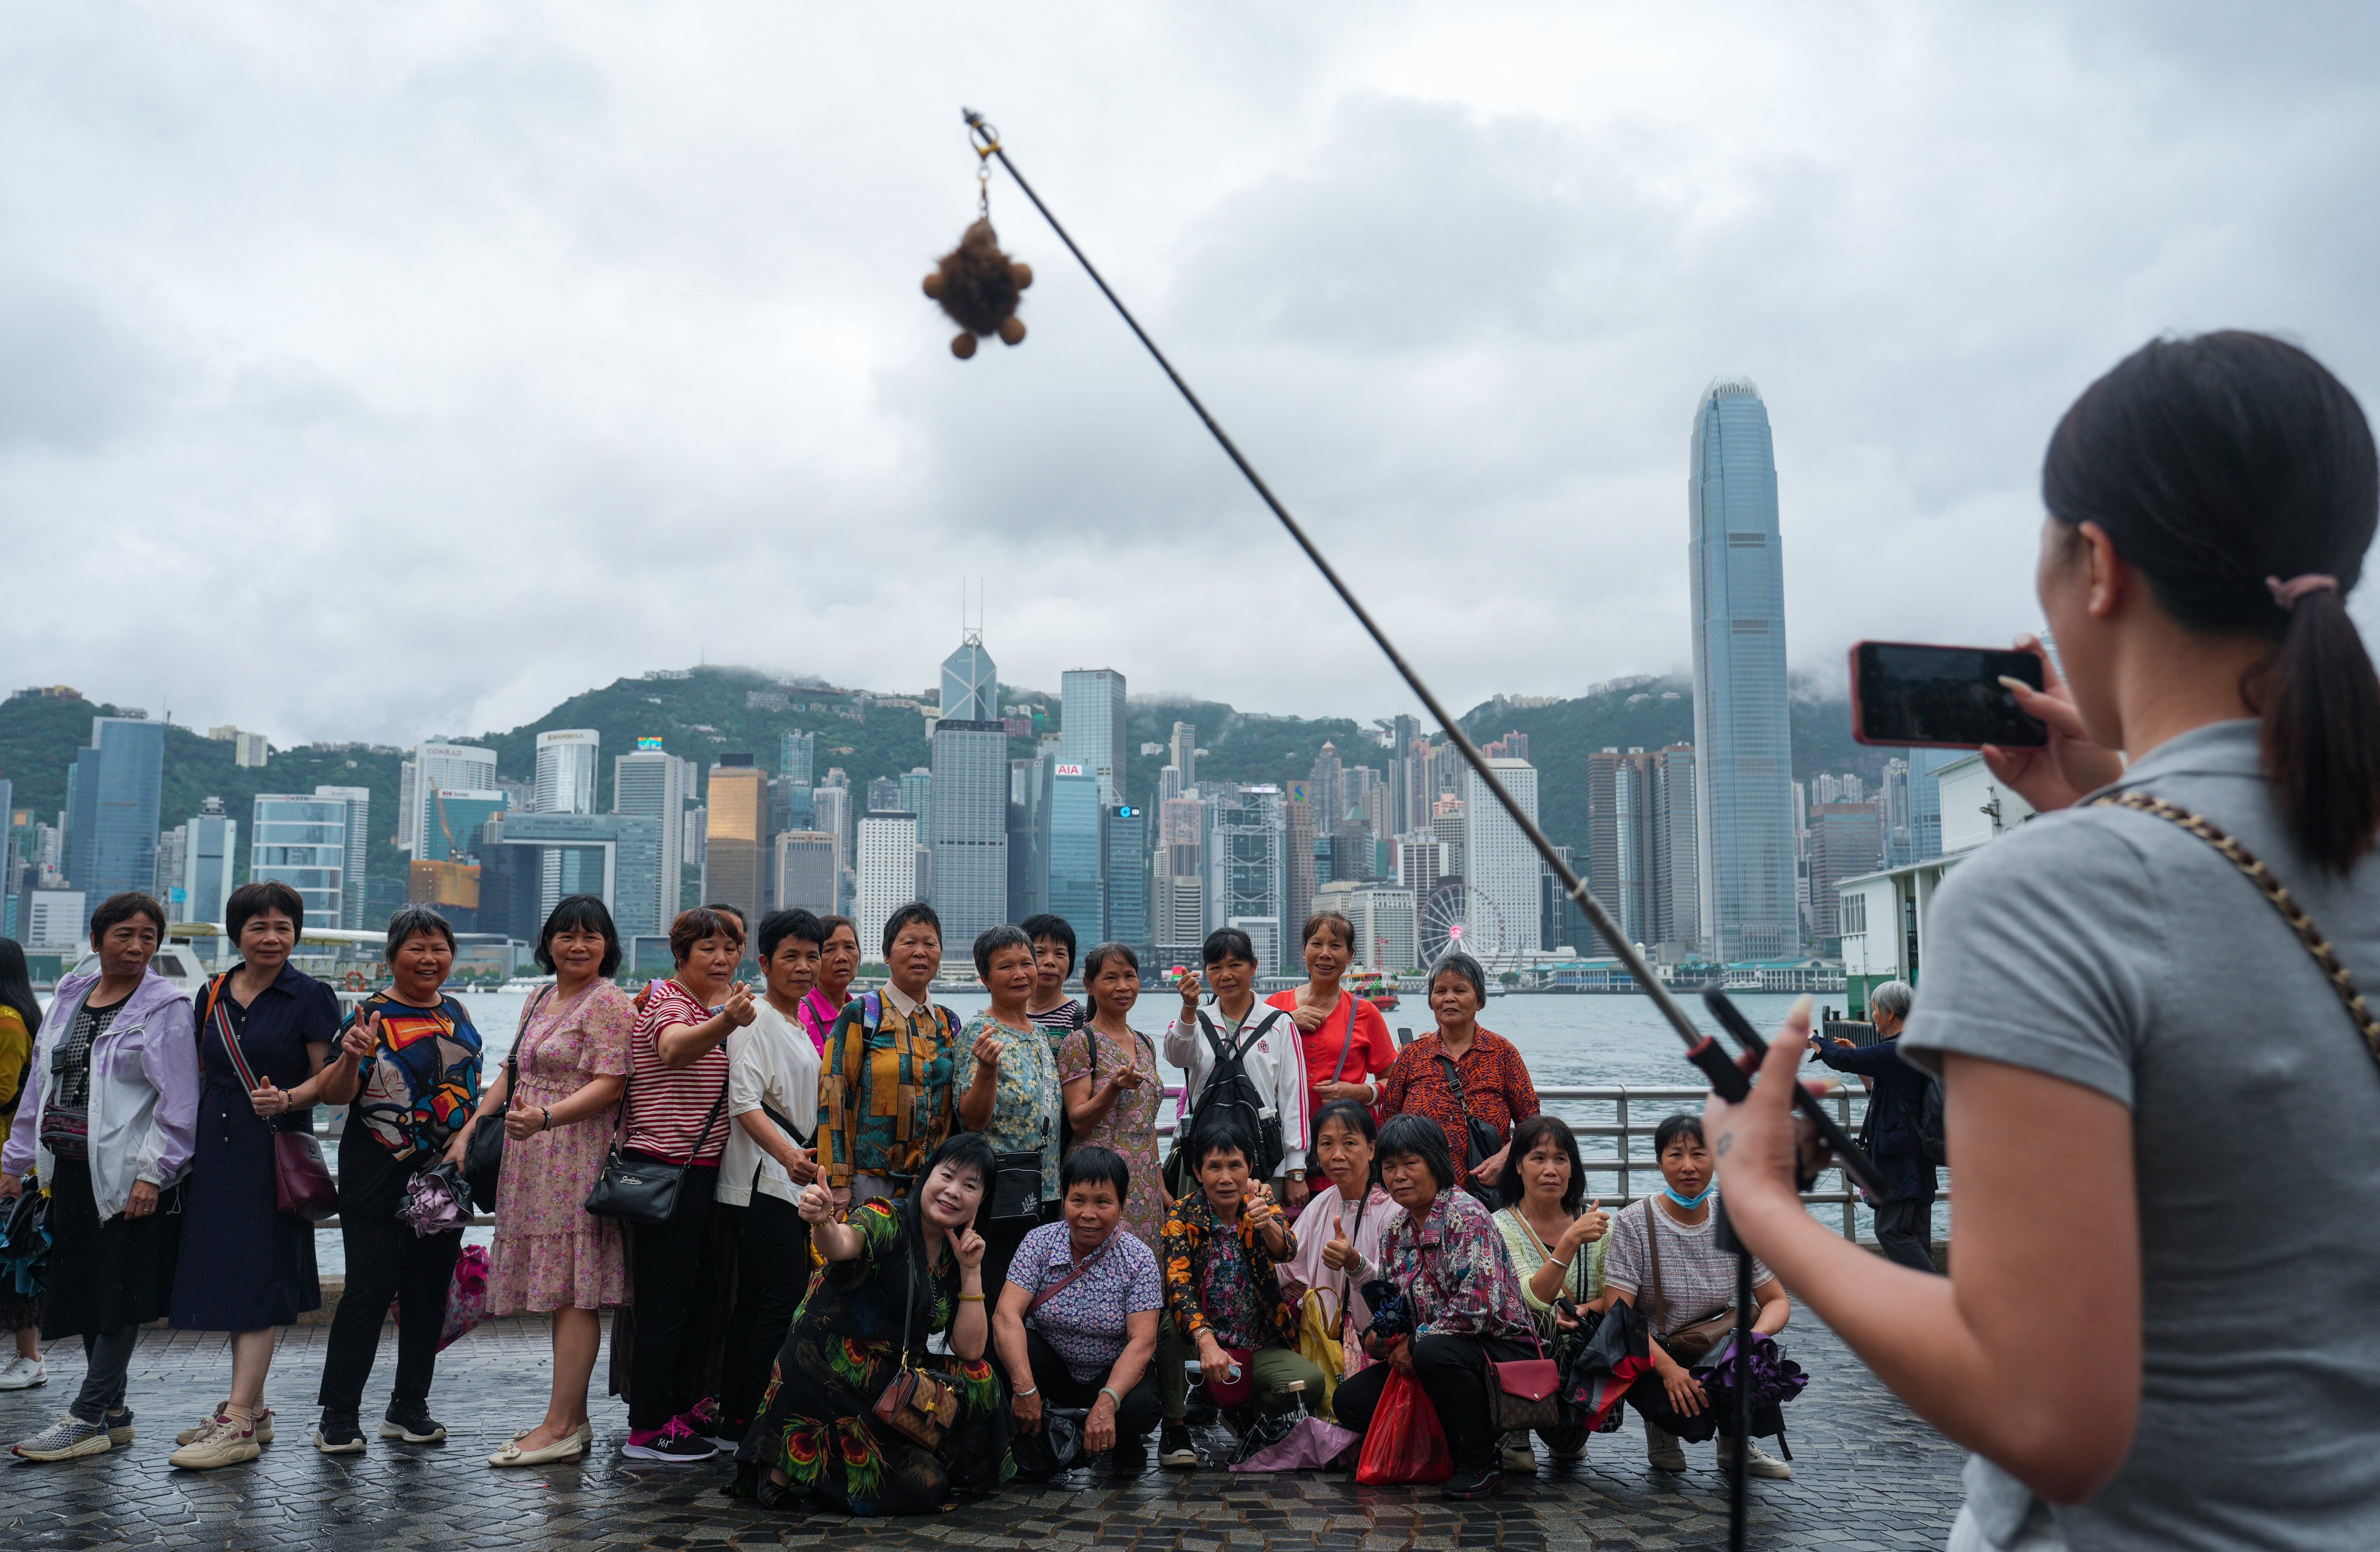 Visitors pose for a photo in Tsim Sha Tsui. Authorities have said there may be last-minute changes to a Victoria Harbour fireworks display on May 1. Photo: Sam Tsang